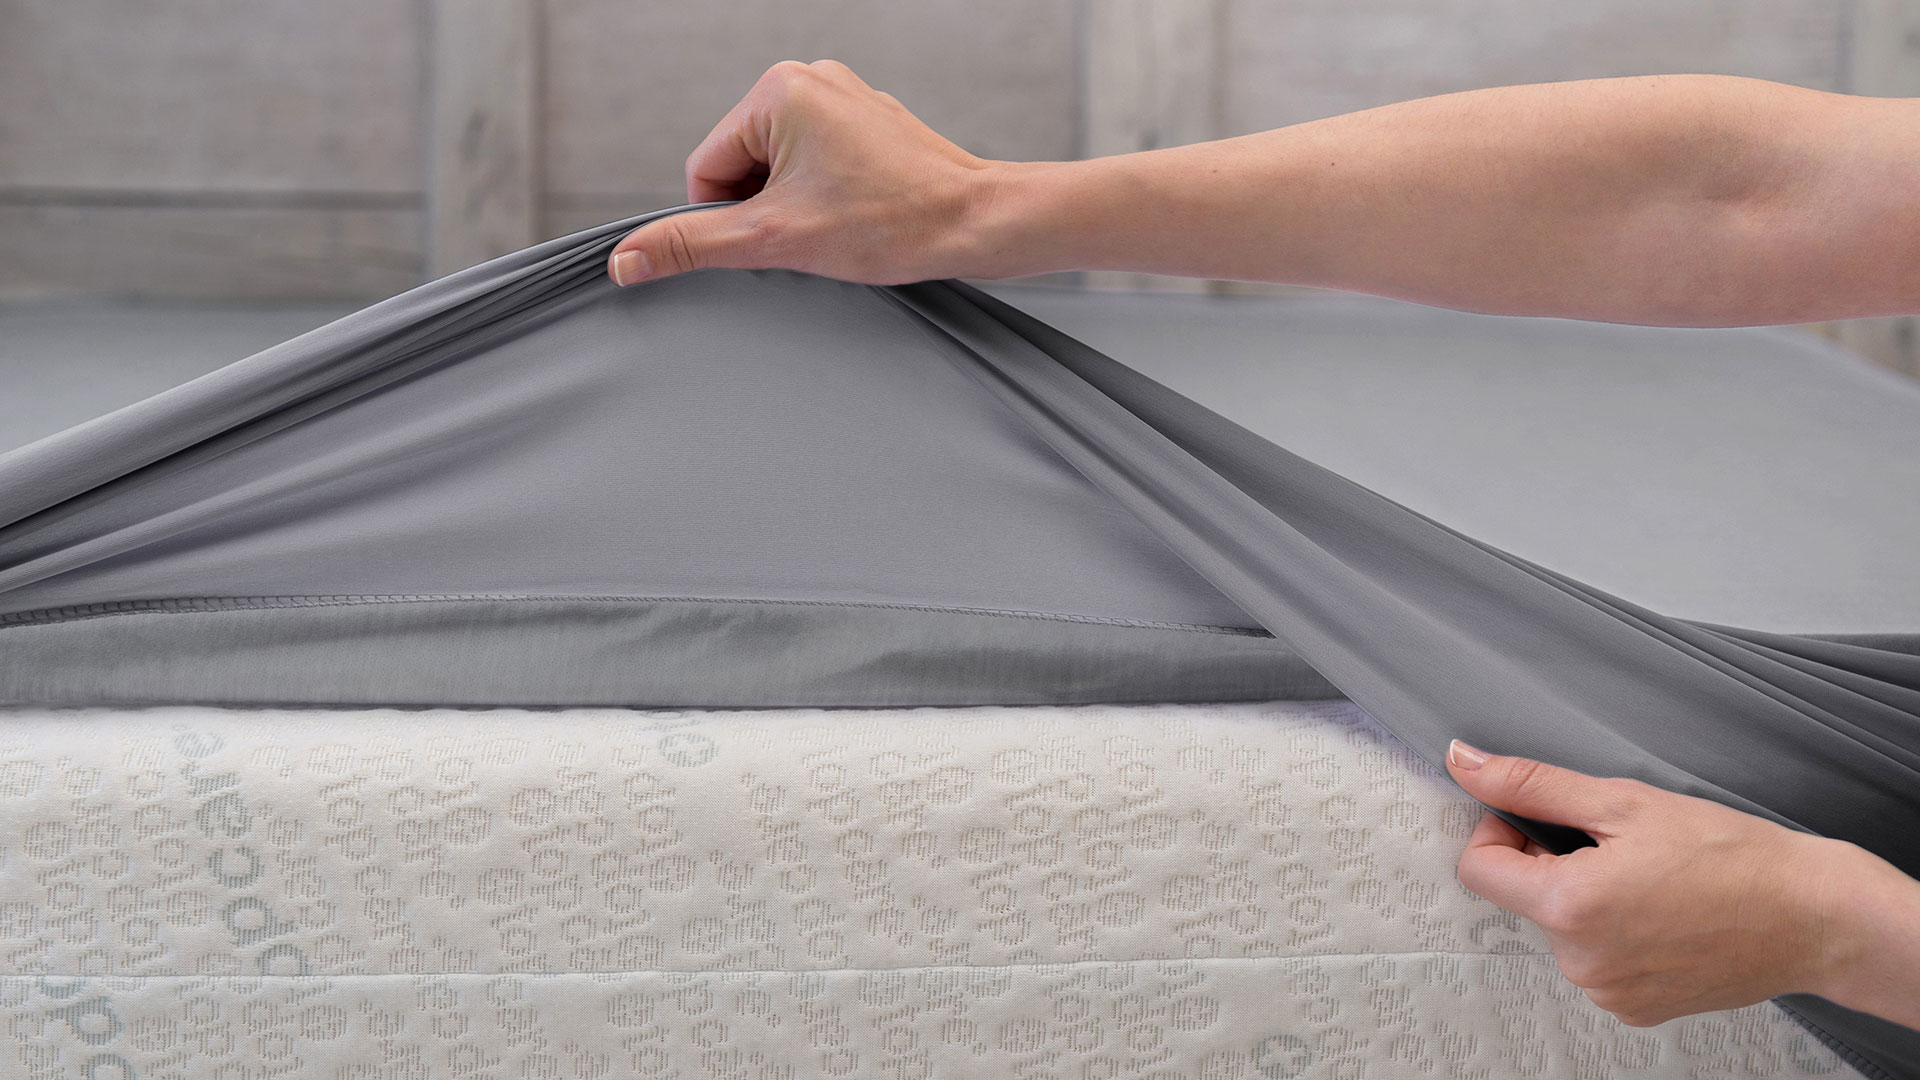 NATURZINC fitted sheet with waterproof surface and sides